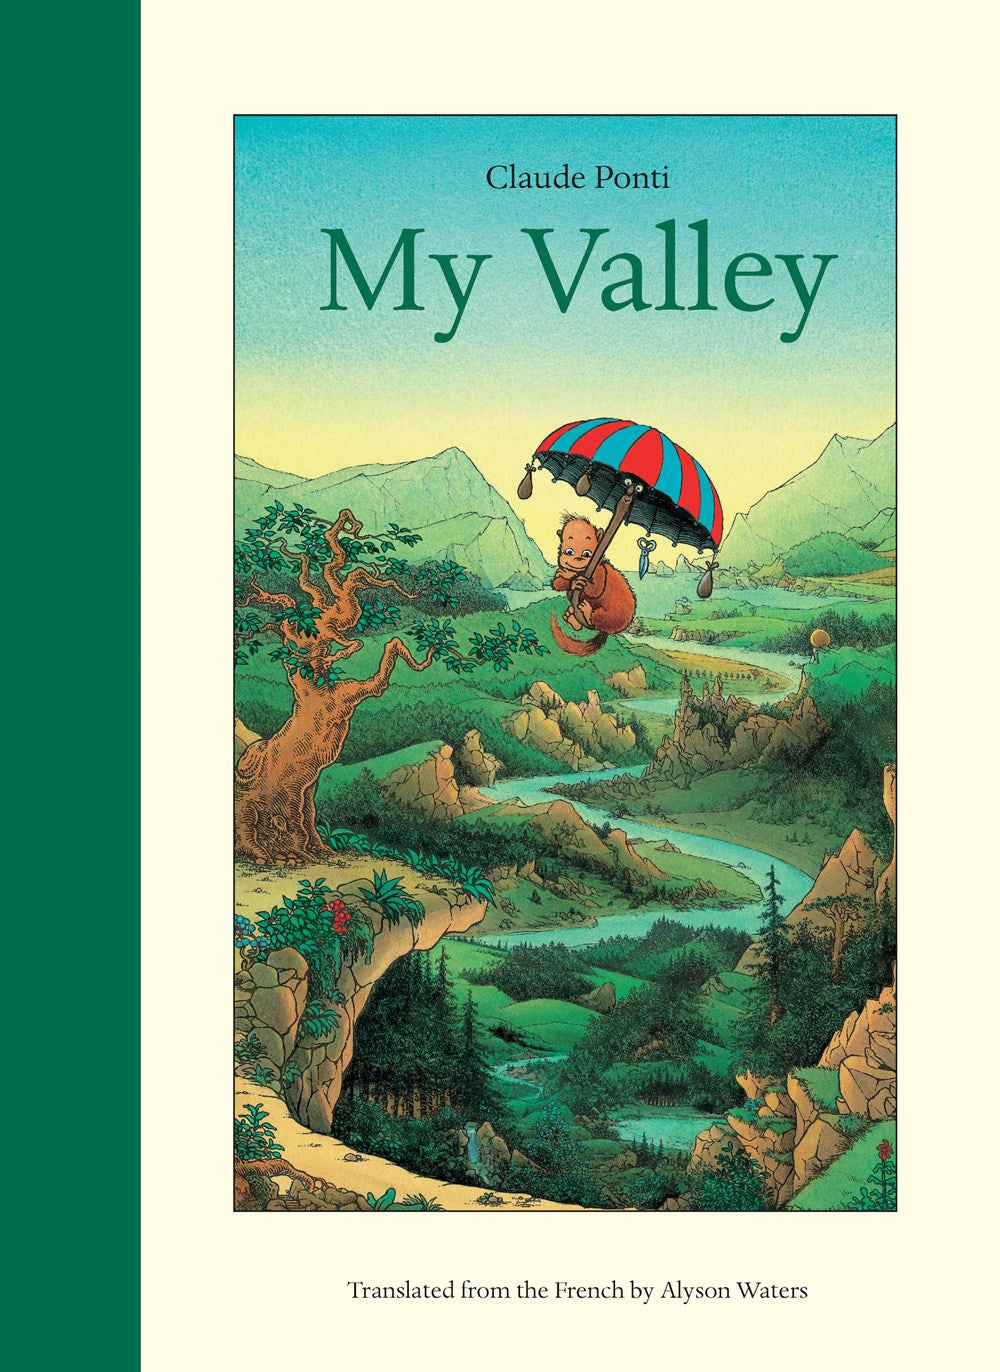 My Valley by Claude Ponti (Translated from the French by Alyson Waters)